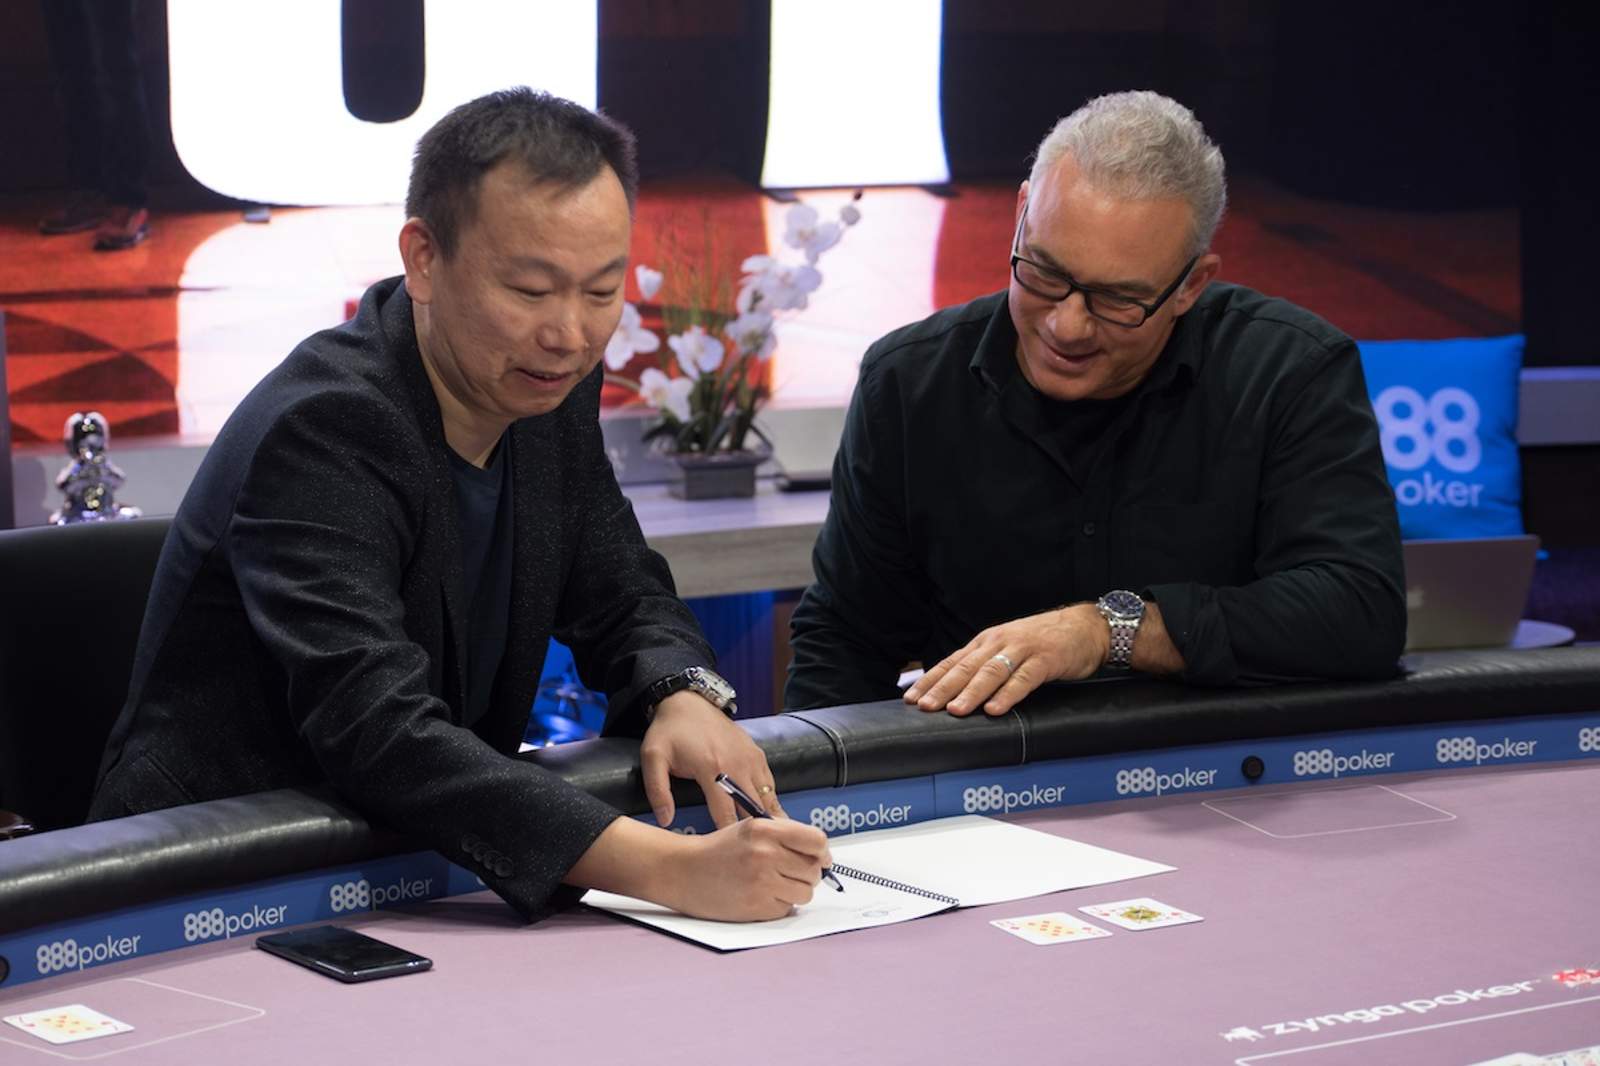 Poker Central and DOUPAI.TV Partner to Bring WSOP to China